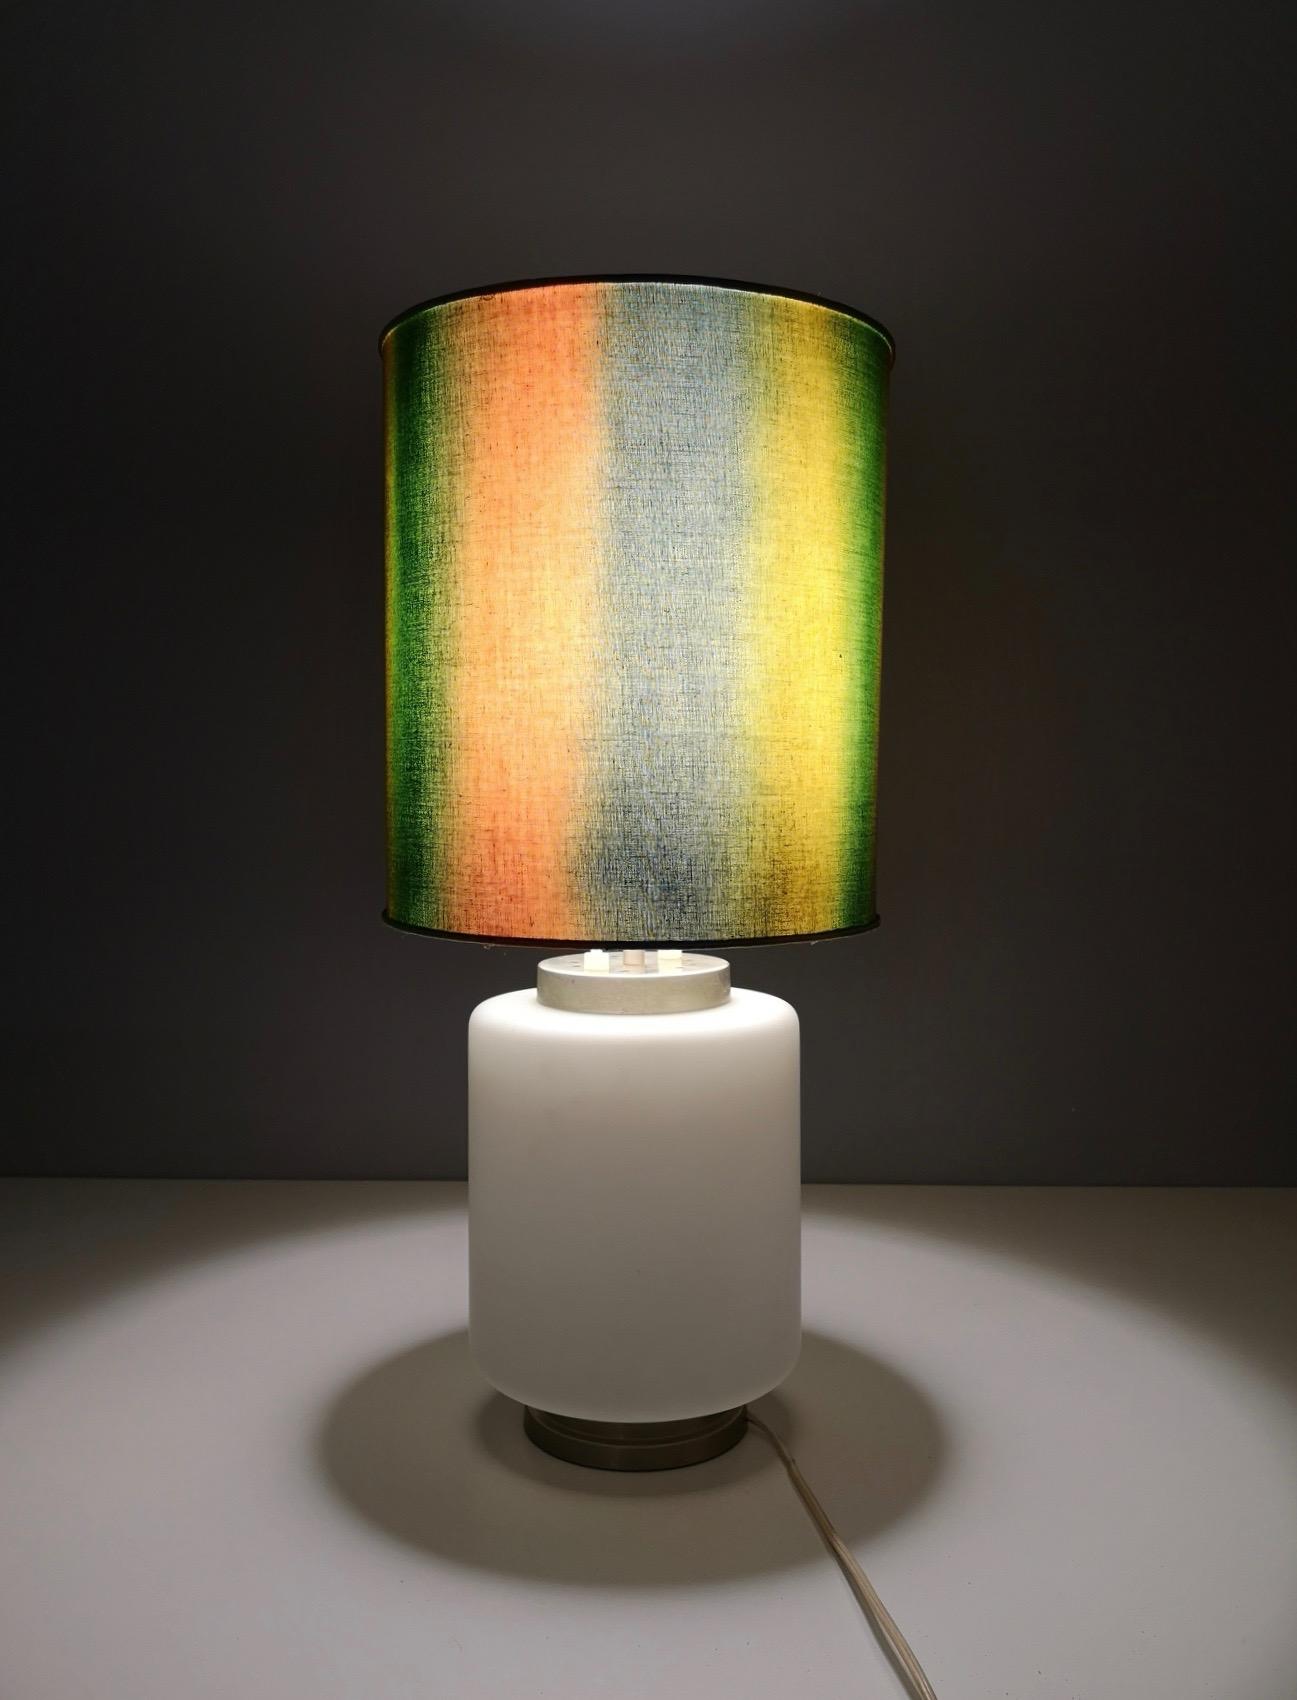 Made in Italy, 1960s.
It is made in encased glass, metal and fabric. 
This table lamp features two lights: they can be switched on separately or at the same time. 
It might show slight traces of use since it's vintage, but it can be considered as in